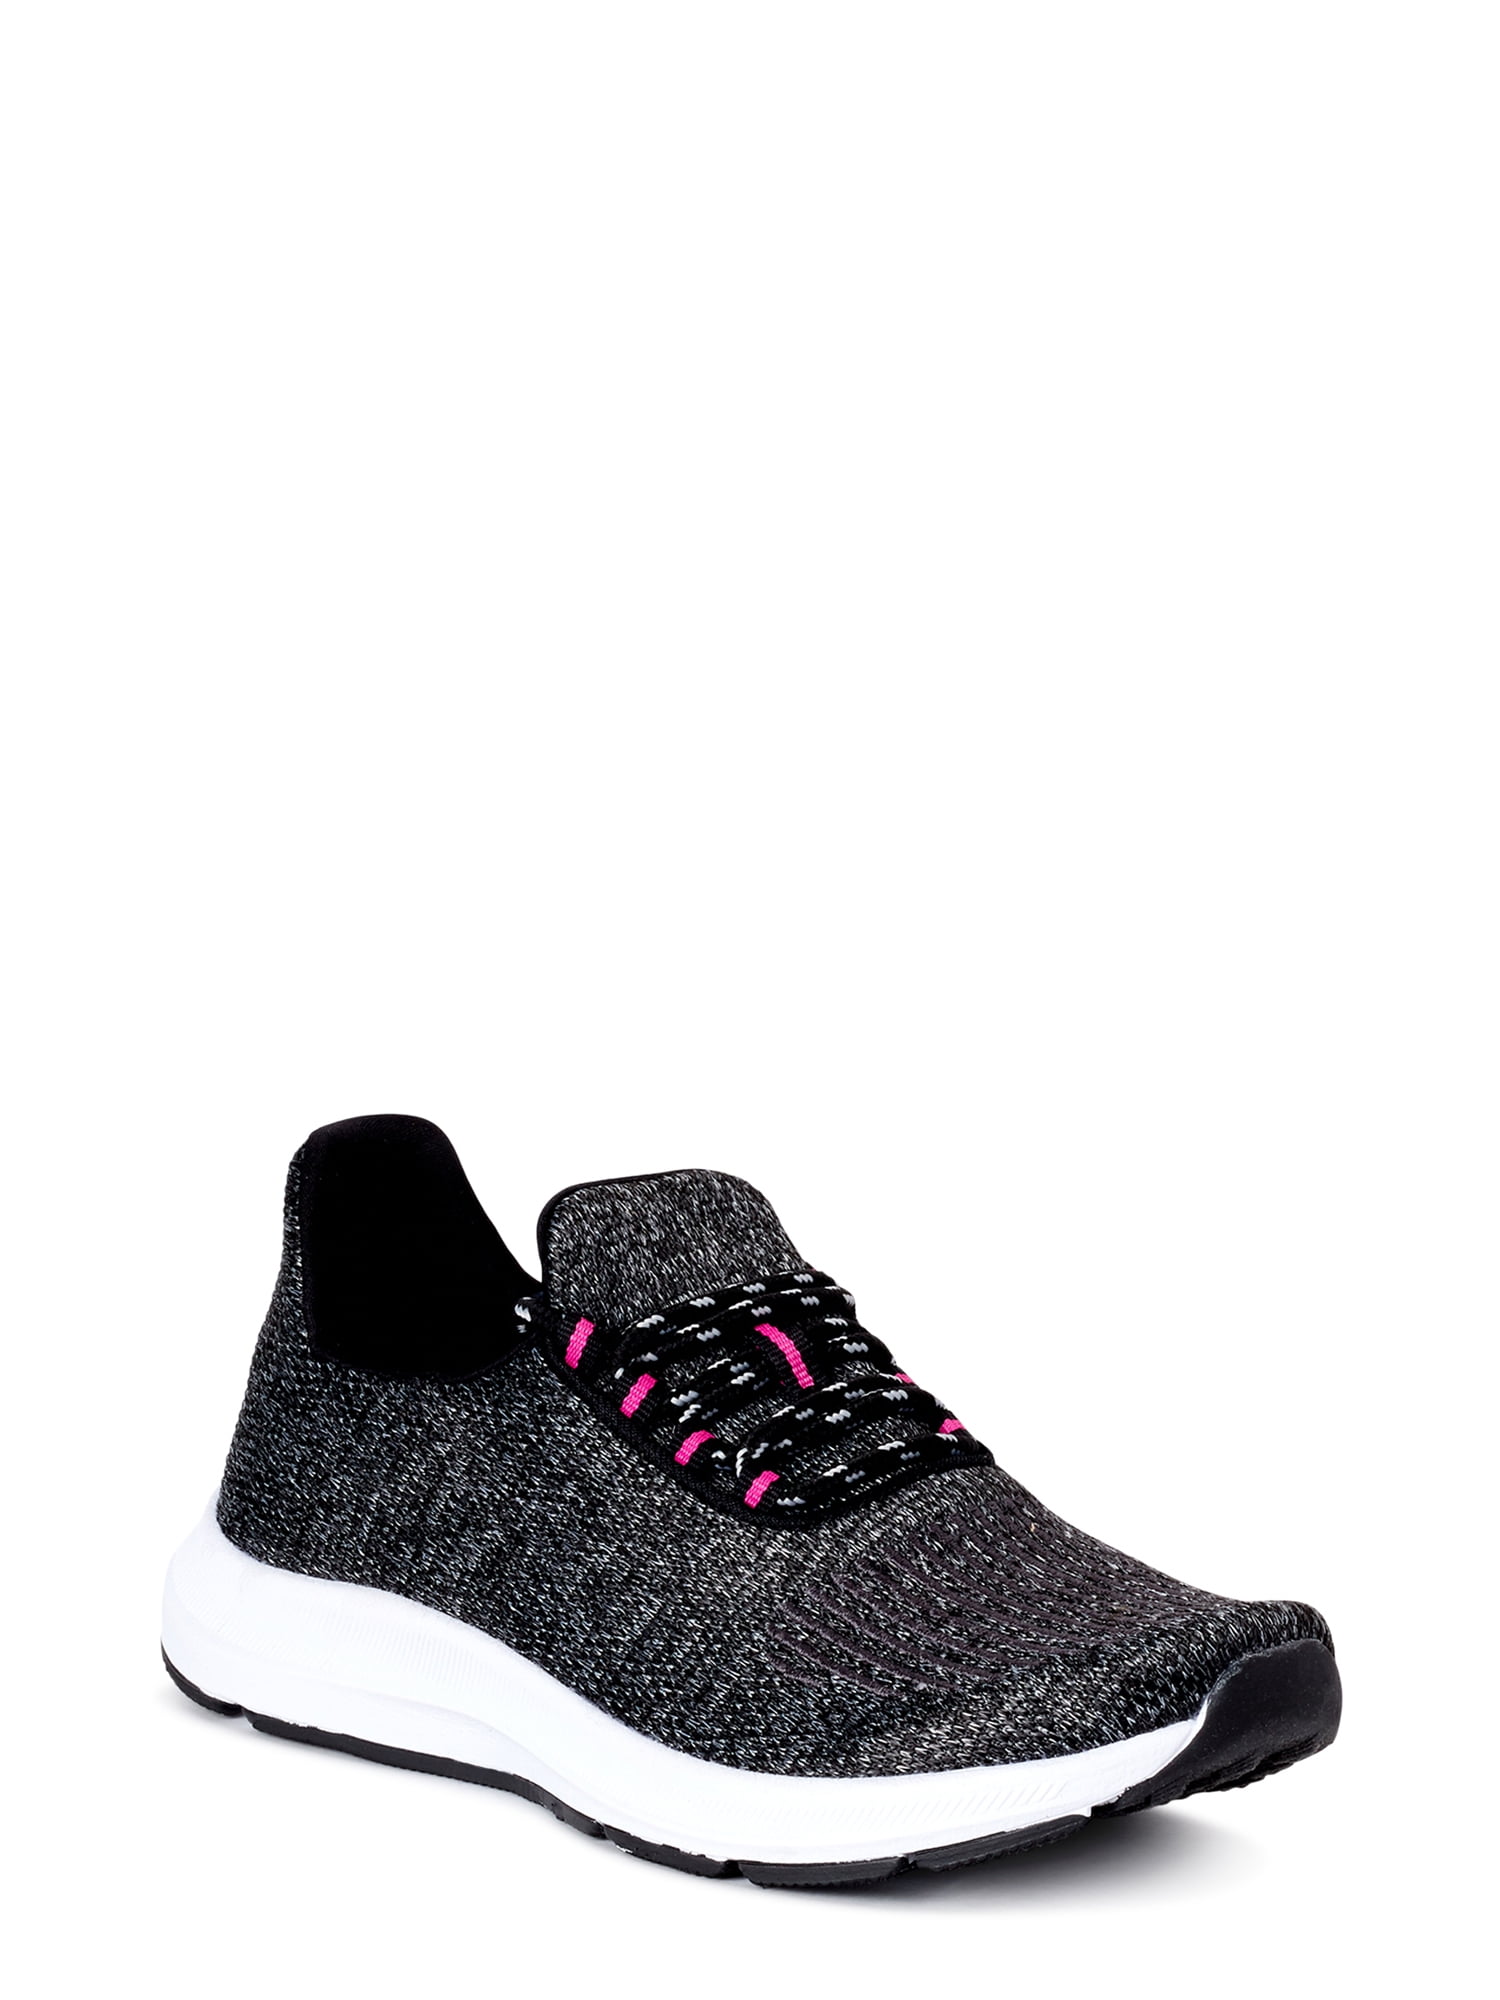 Athletic Works Shoes : Apparel 